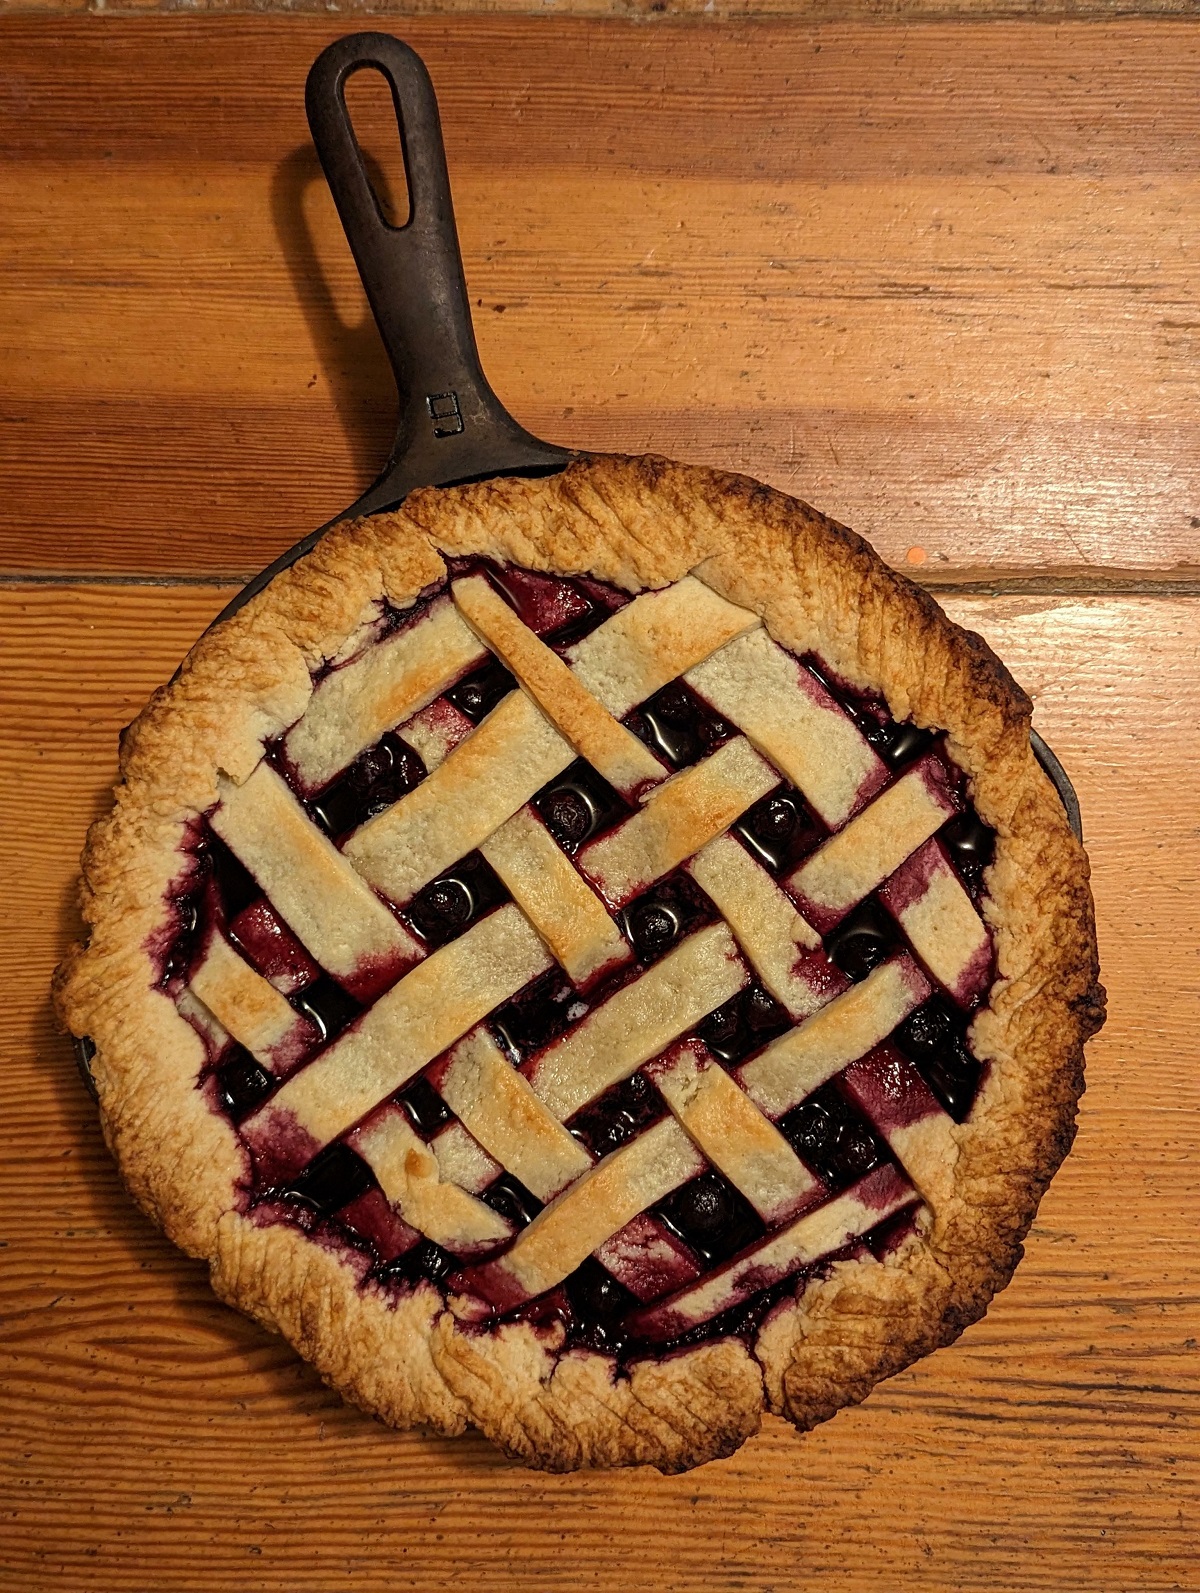 My First Time Making Blueberry Pie